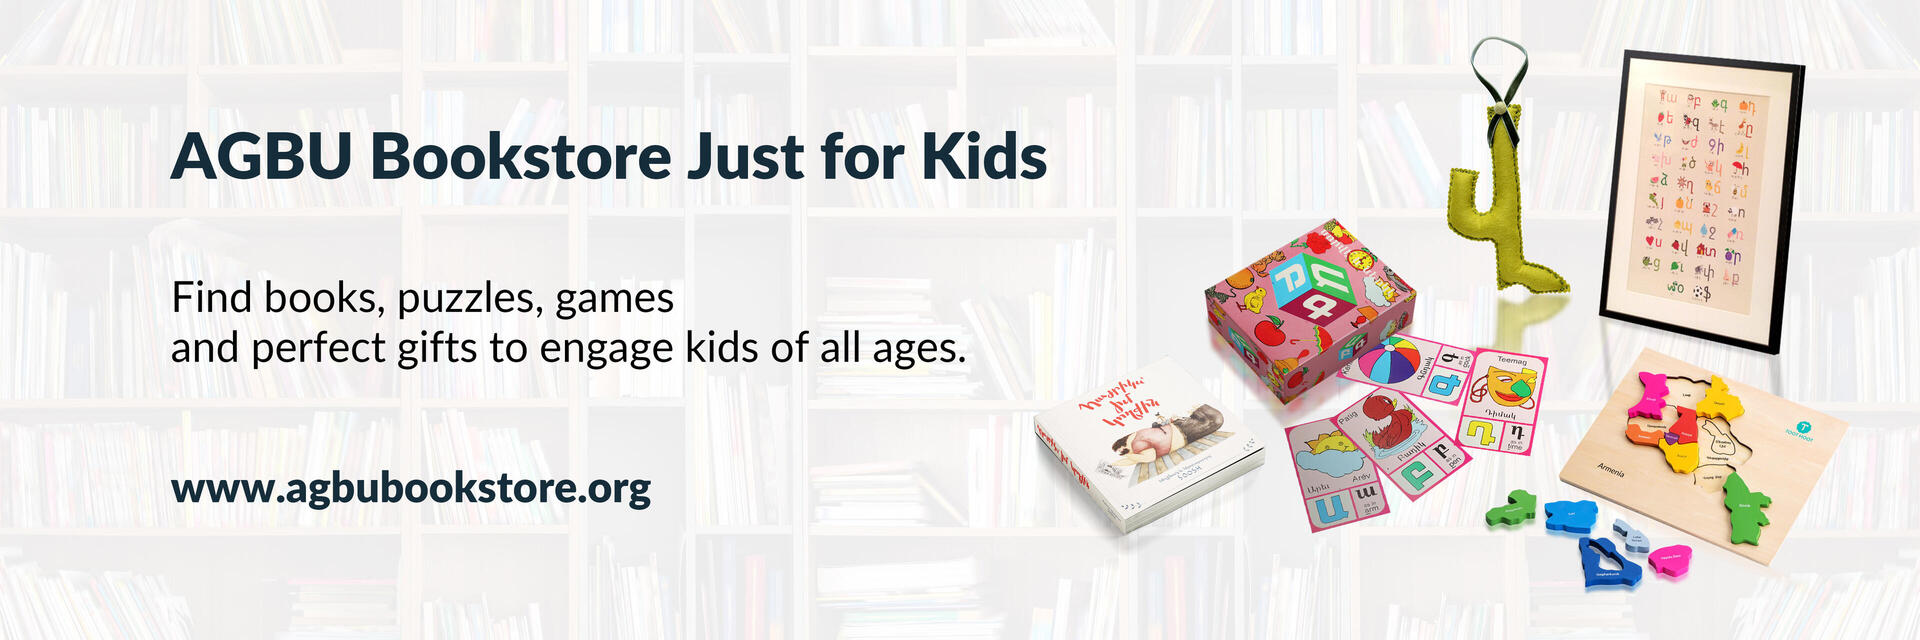 · Books · Gifts for Kids · Women Entrepreneurs Collection